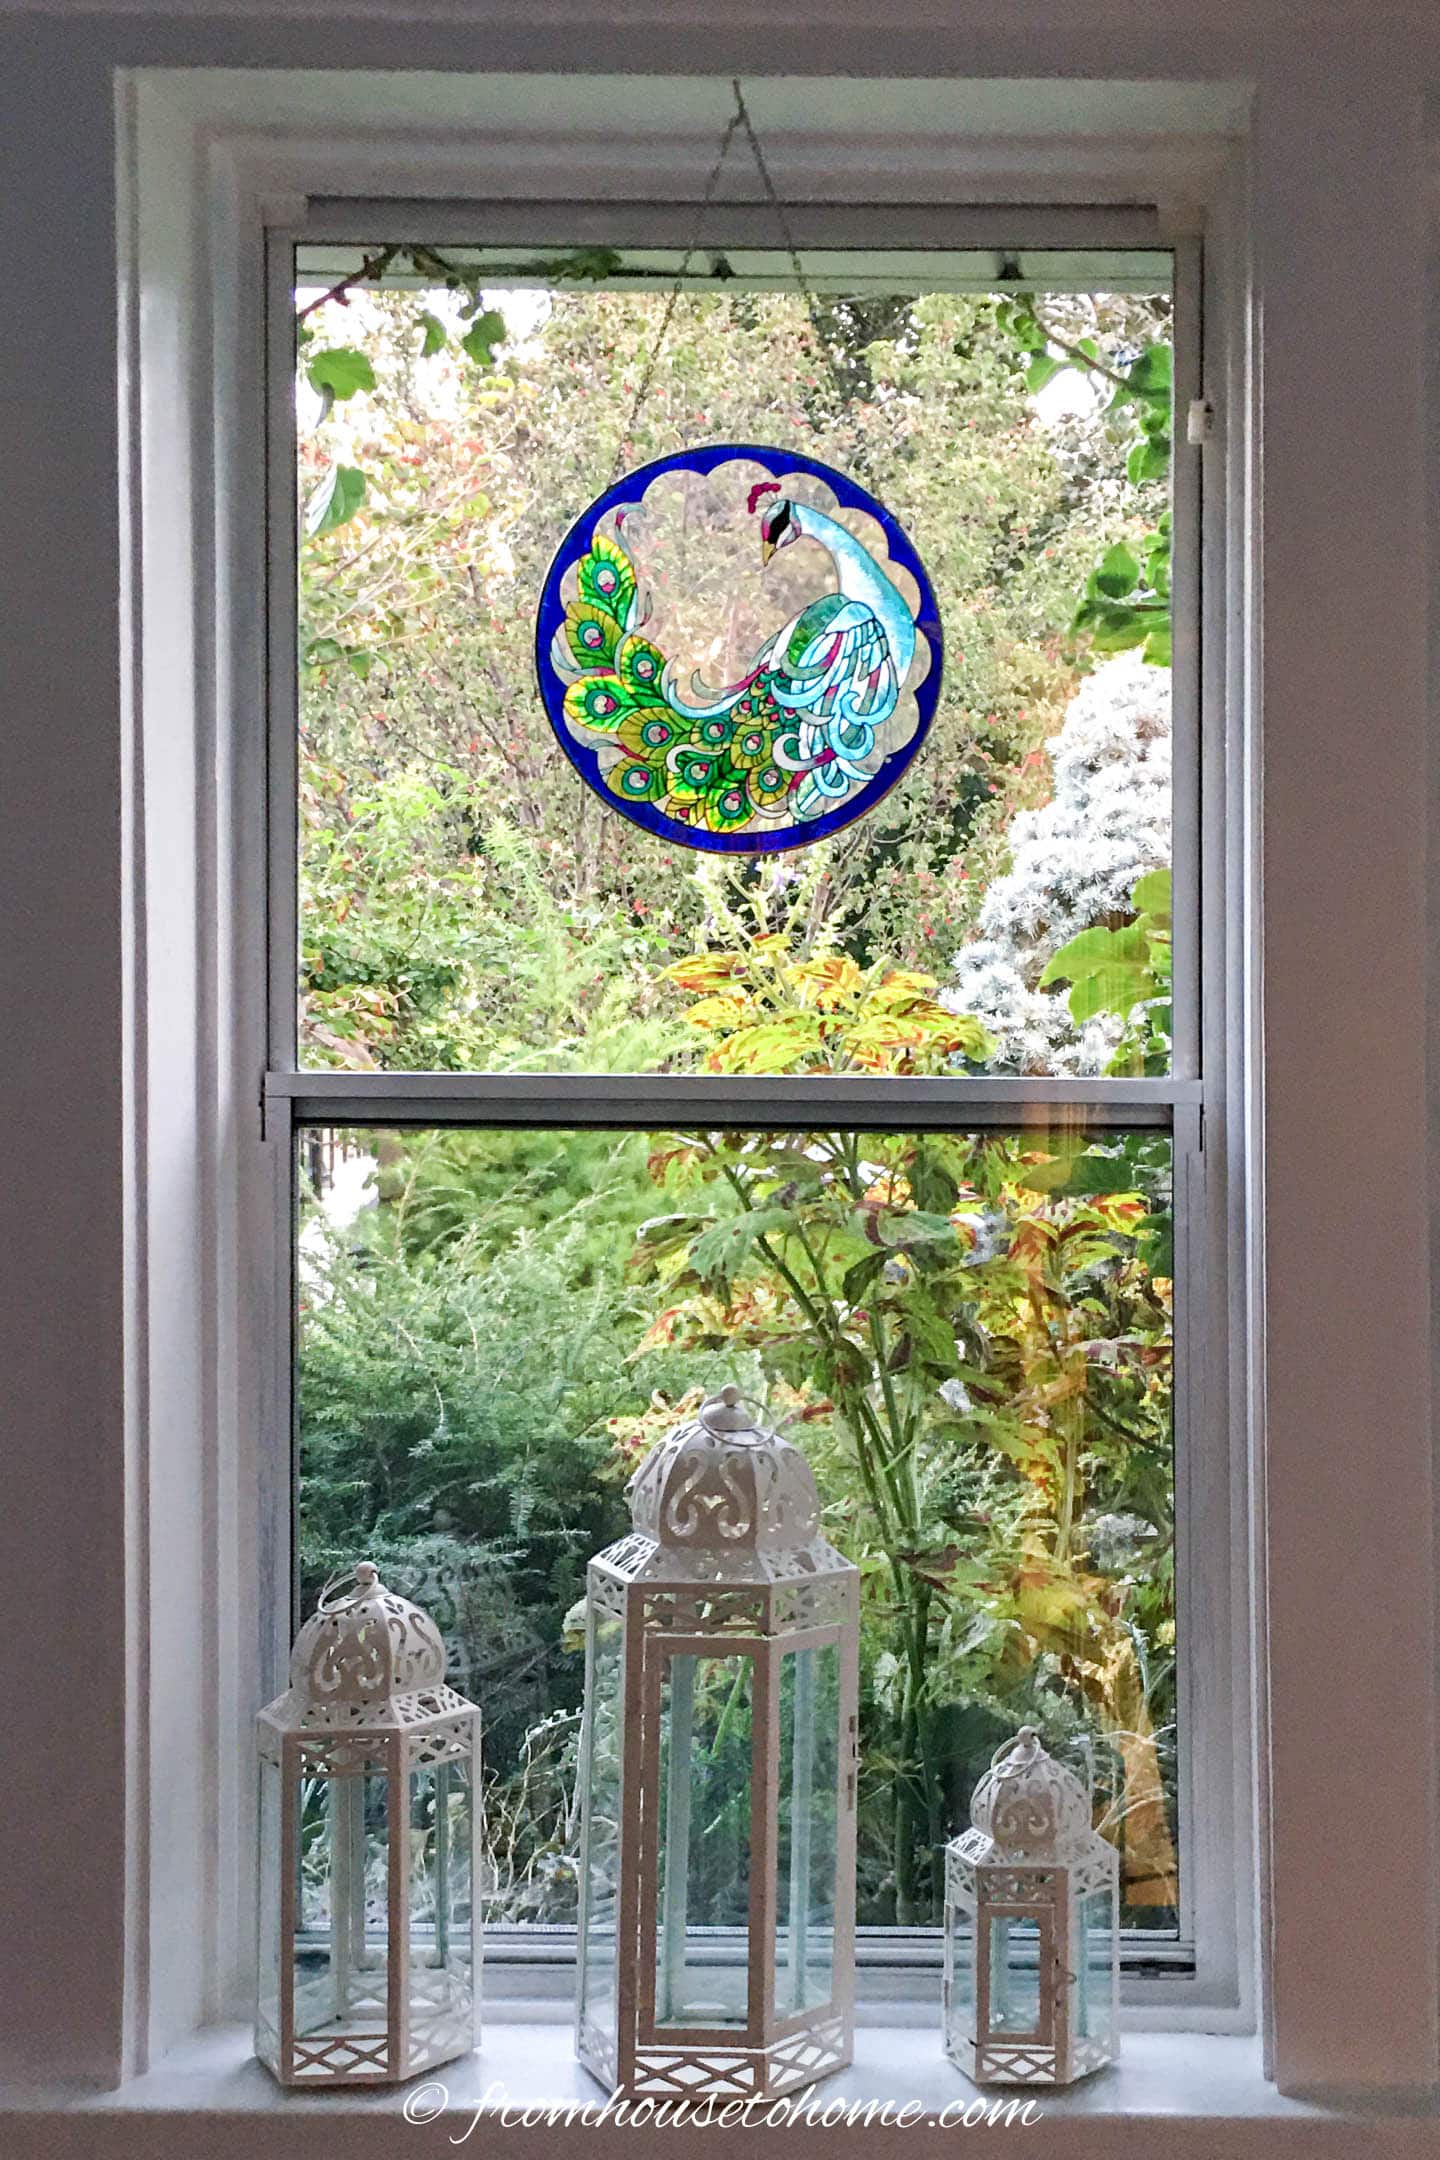 A window with a peacock sun catcher and white lanterns